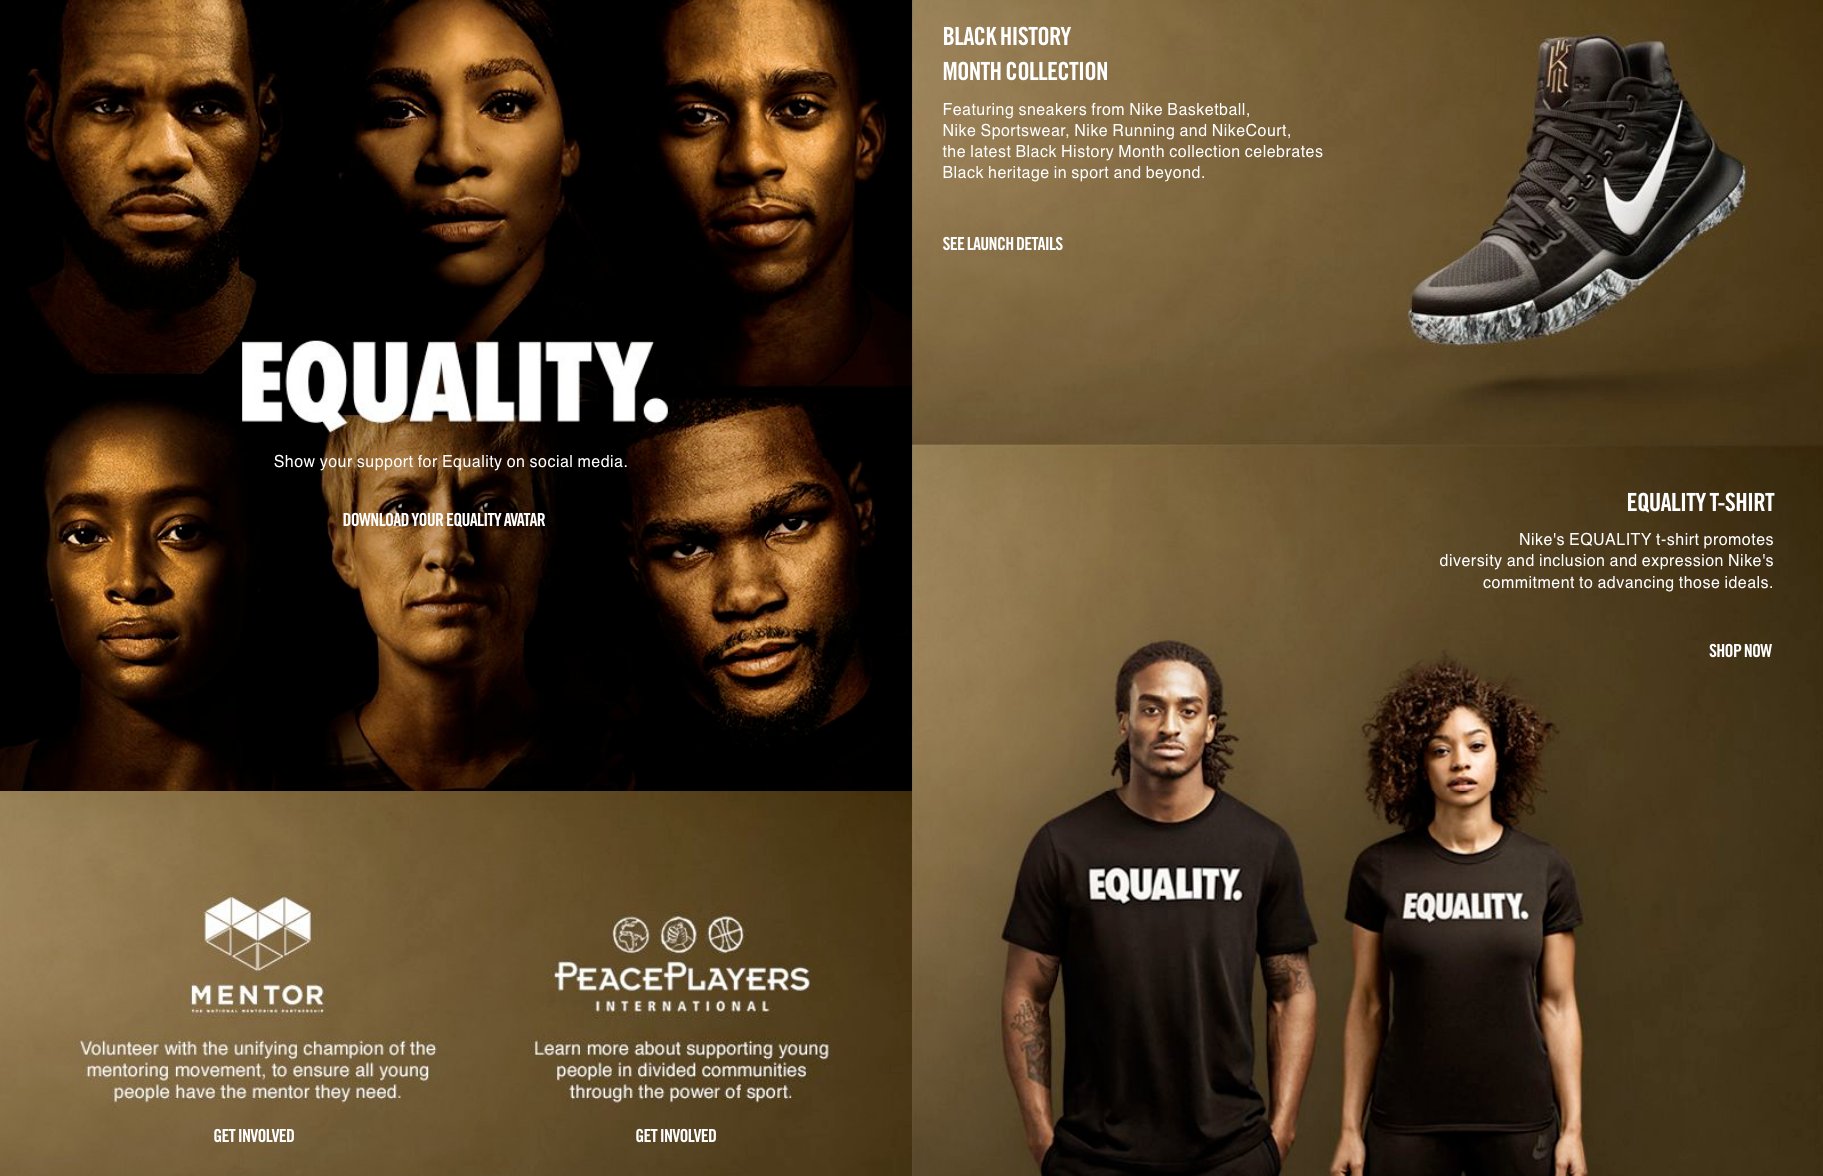 KicksFinder on Twitter: "Nike celebrates Equality with a campaign and a new including the Equality tee. https://t.co/V3GJA4rXL0 https://t.co/QtqmdMWuQ1" / Twitter